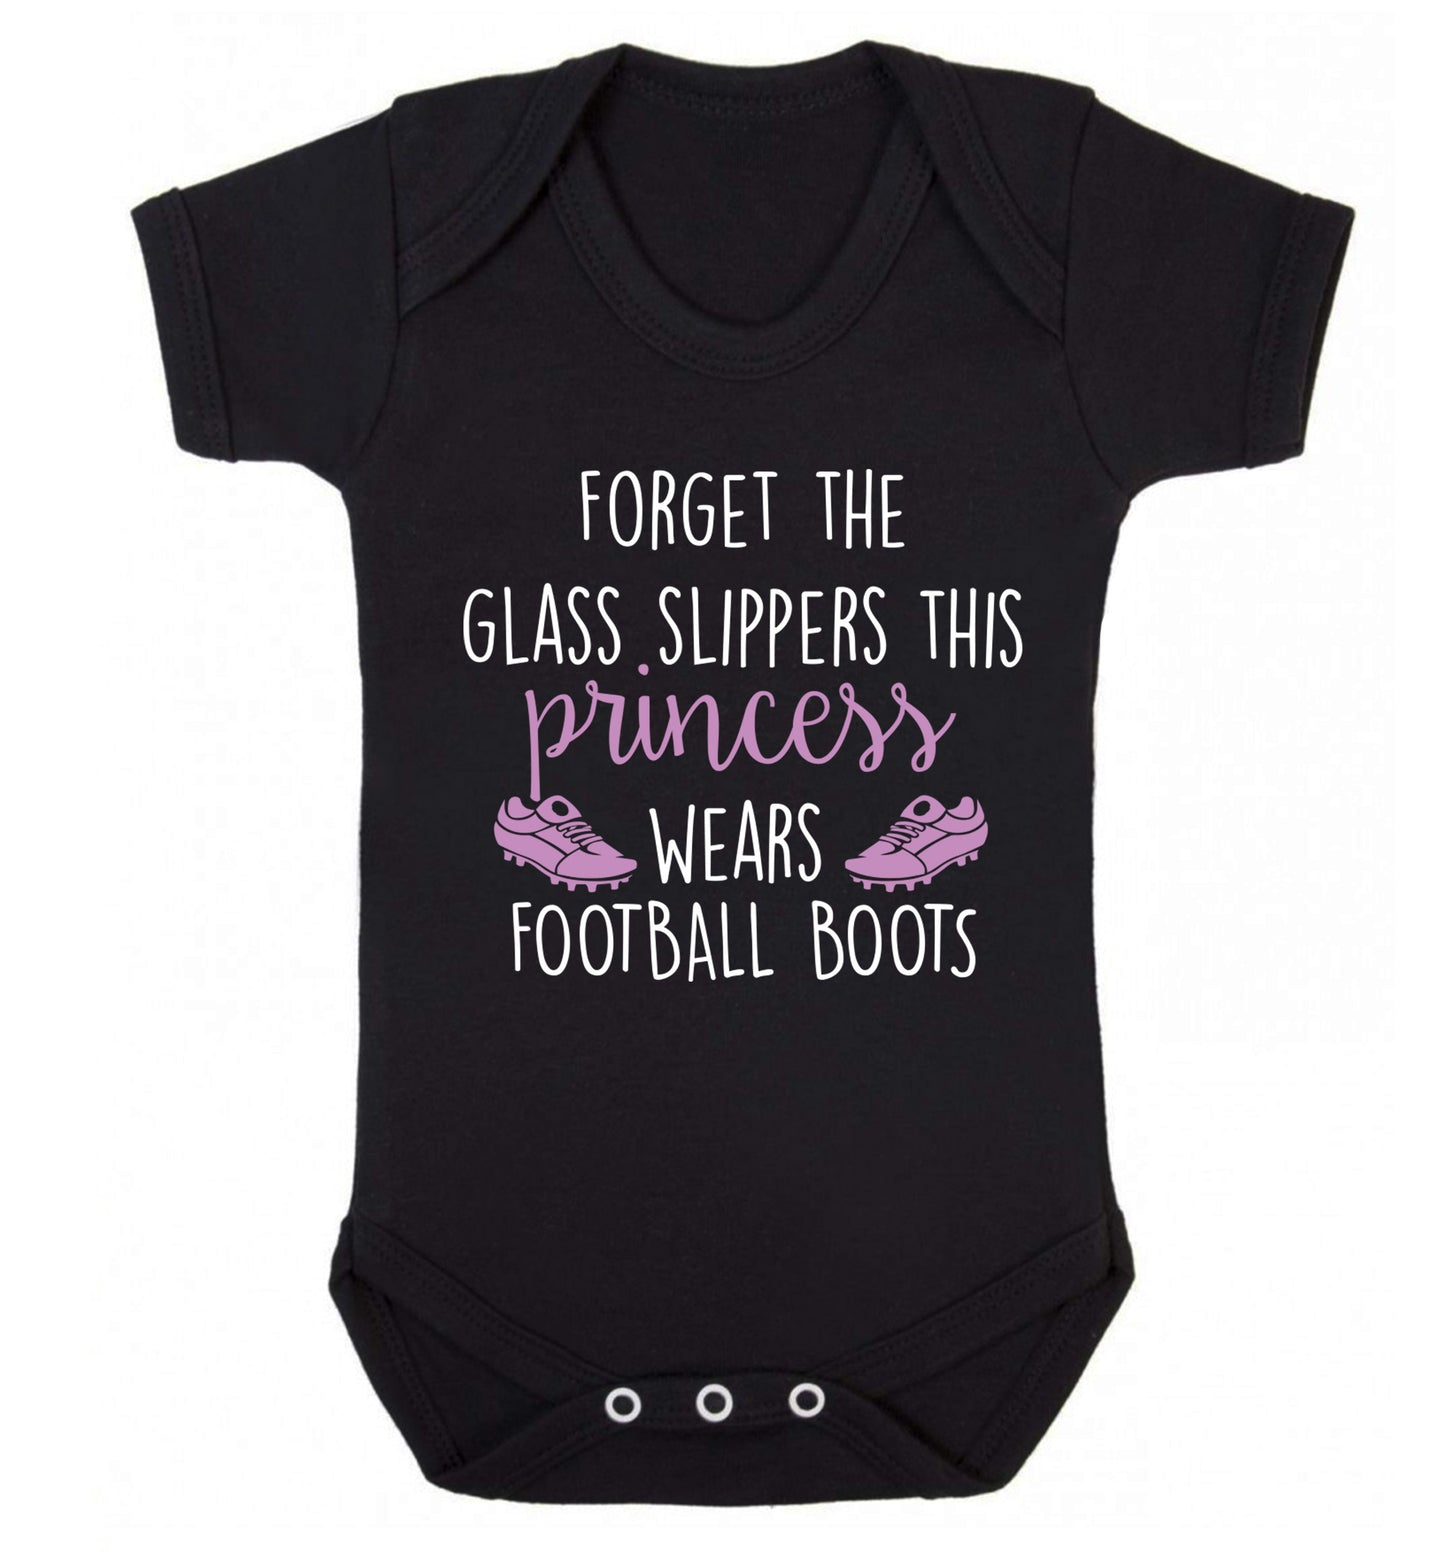 Forget the glass slippers this princess wears football boots Baby Vest black 18-24 months